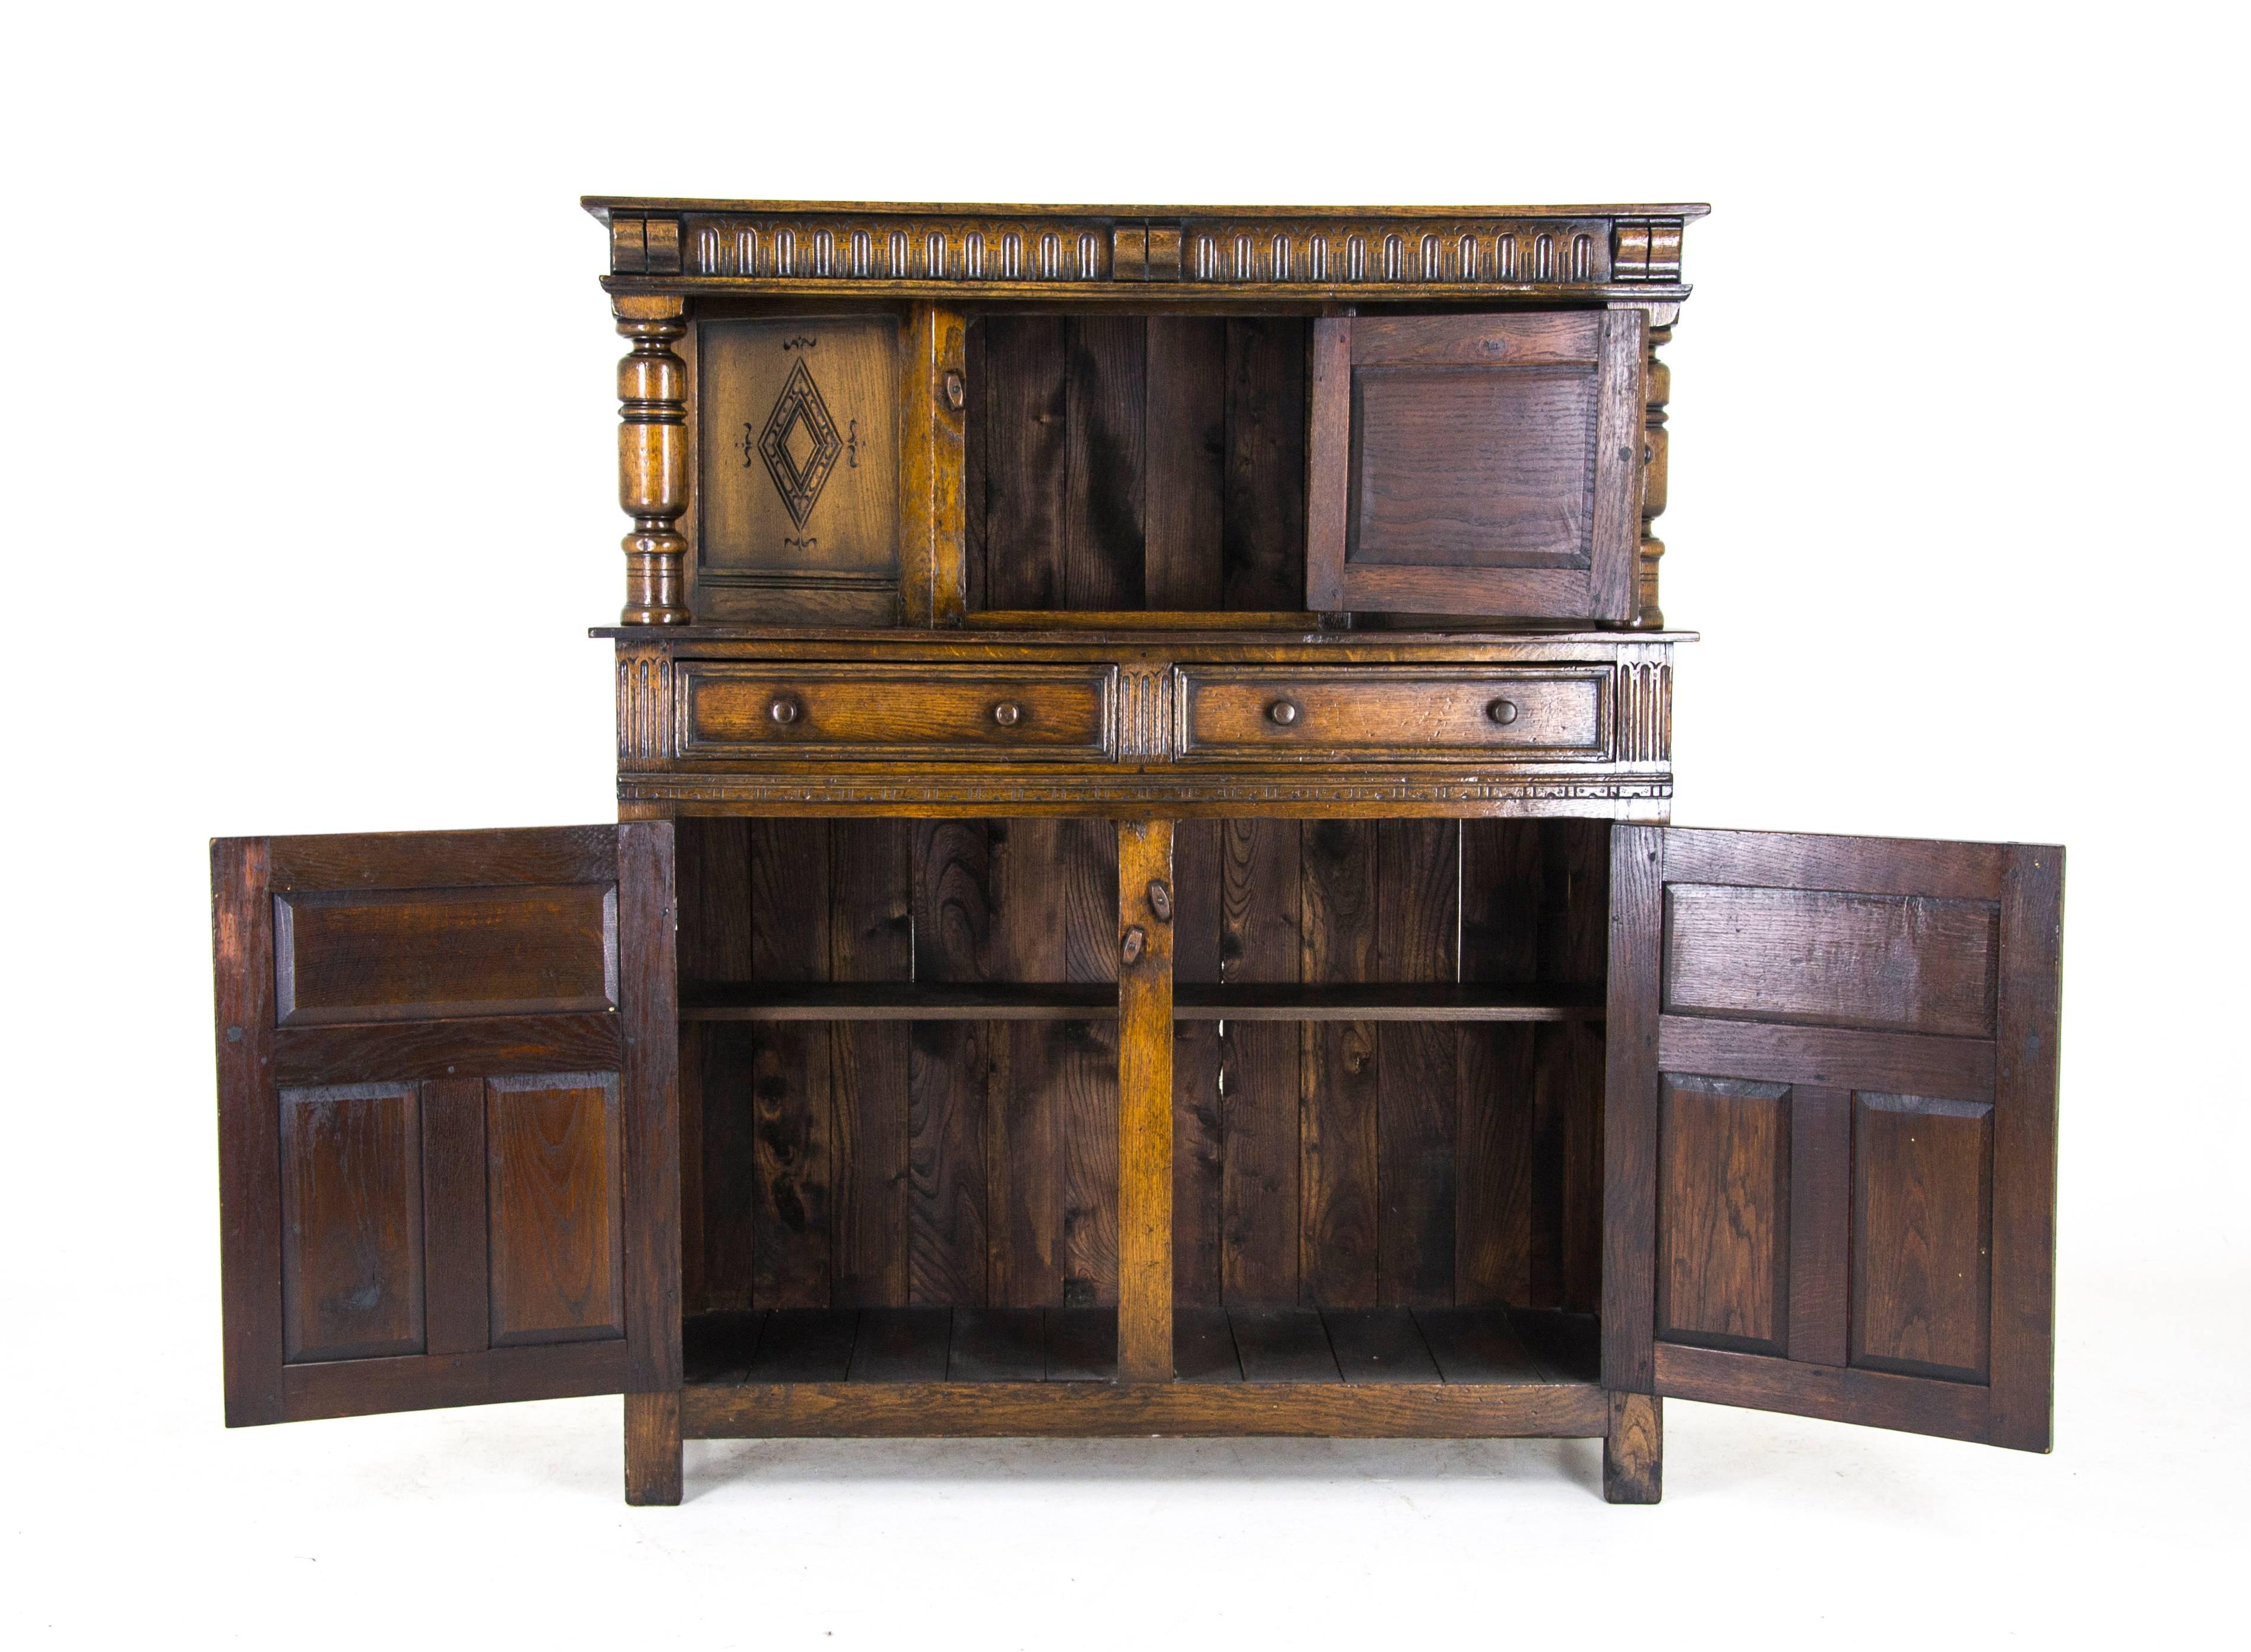 Oak court cupboard carved oak sideboard, Scotland, 1910

Scotland, 1910
Solid oak construction with original finish
Uppers section has three carved panelled sides
Supported by two turned supports
Two dovetailed drawers below
Two carved panelled